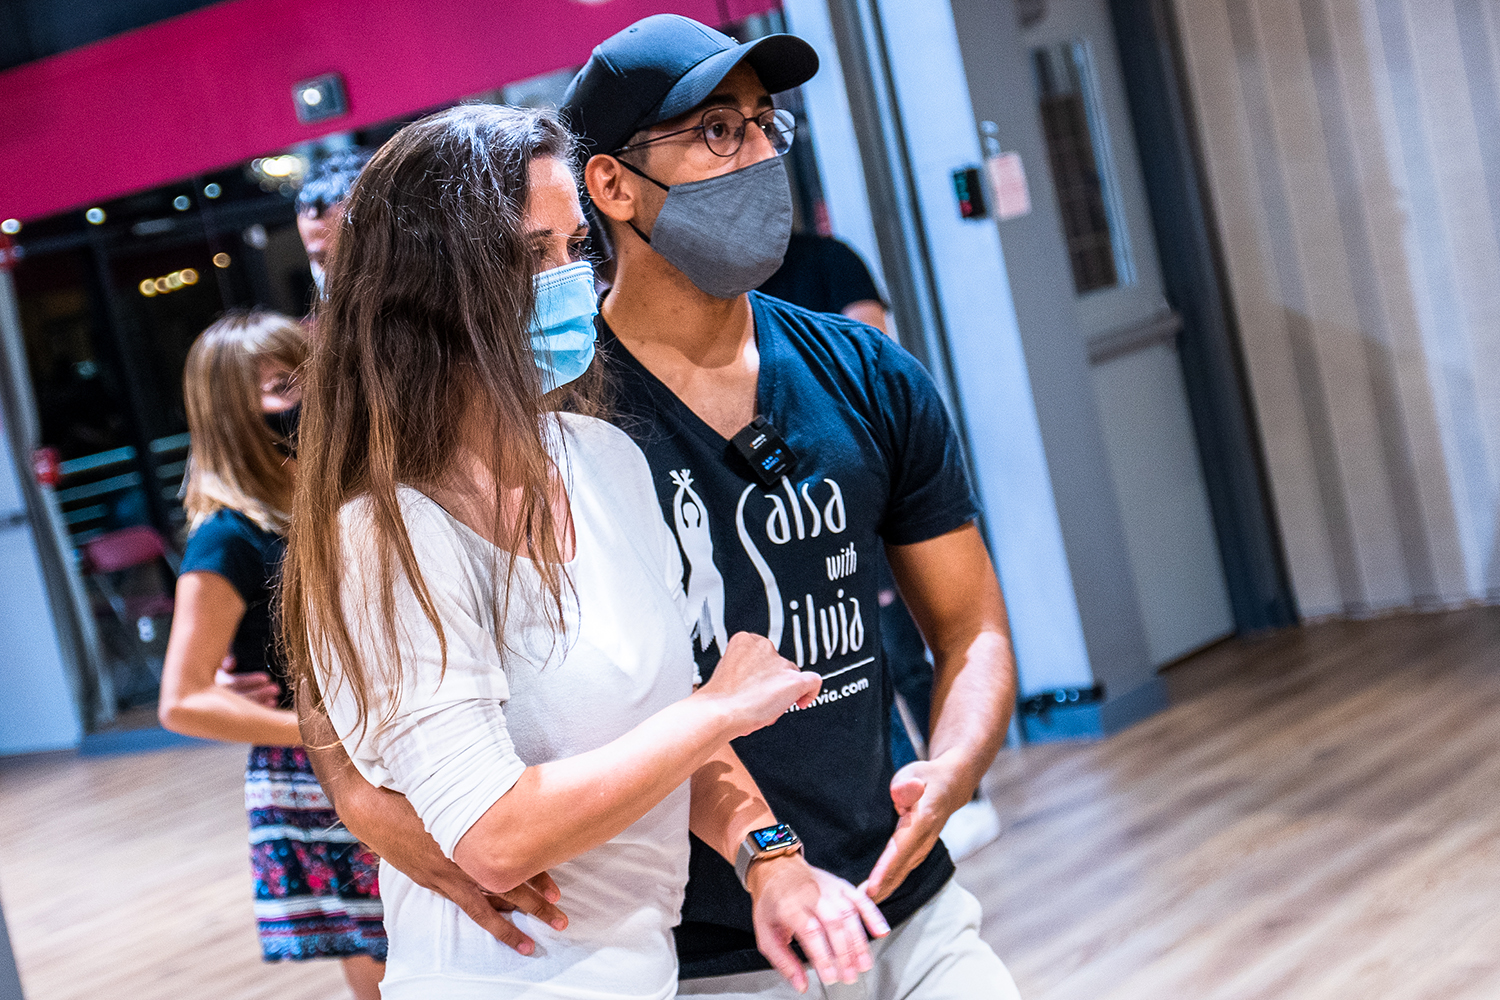 Salsa and Bachata classes during COVID-19 at the Salsa With Silvia dance studio in Bethesda. Safety precautions in place.